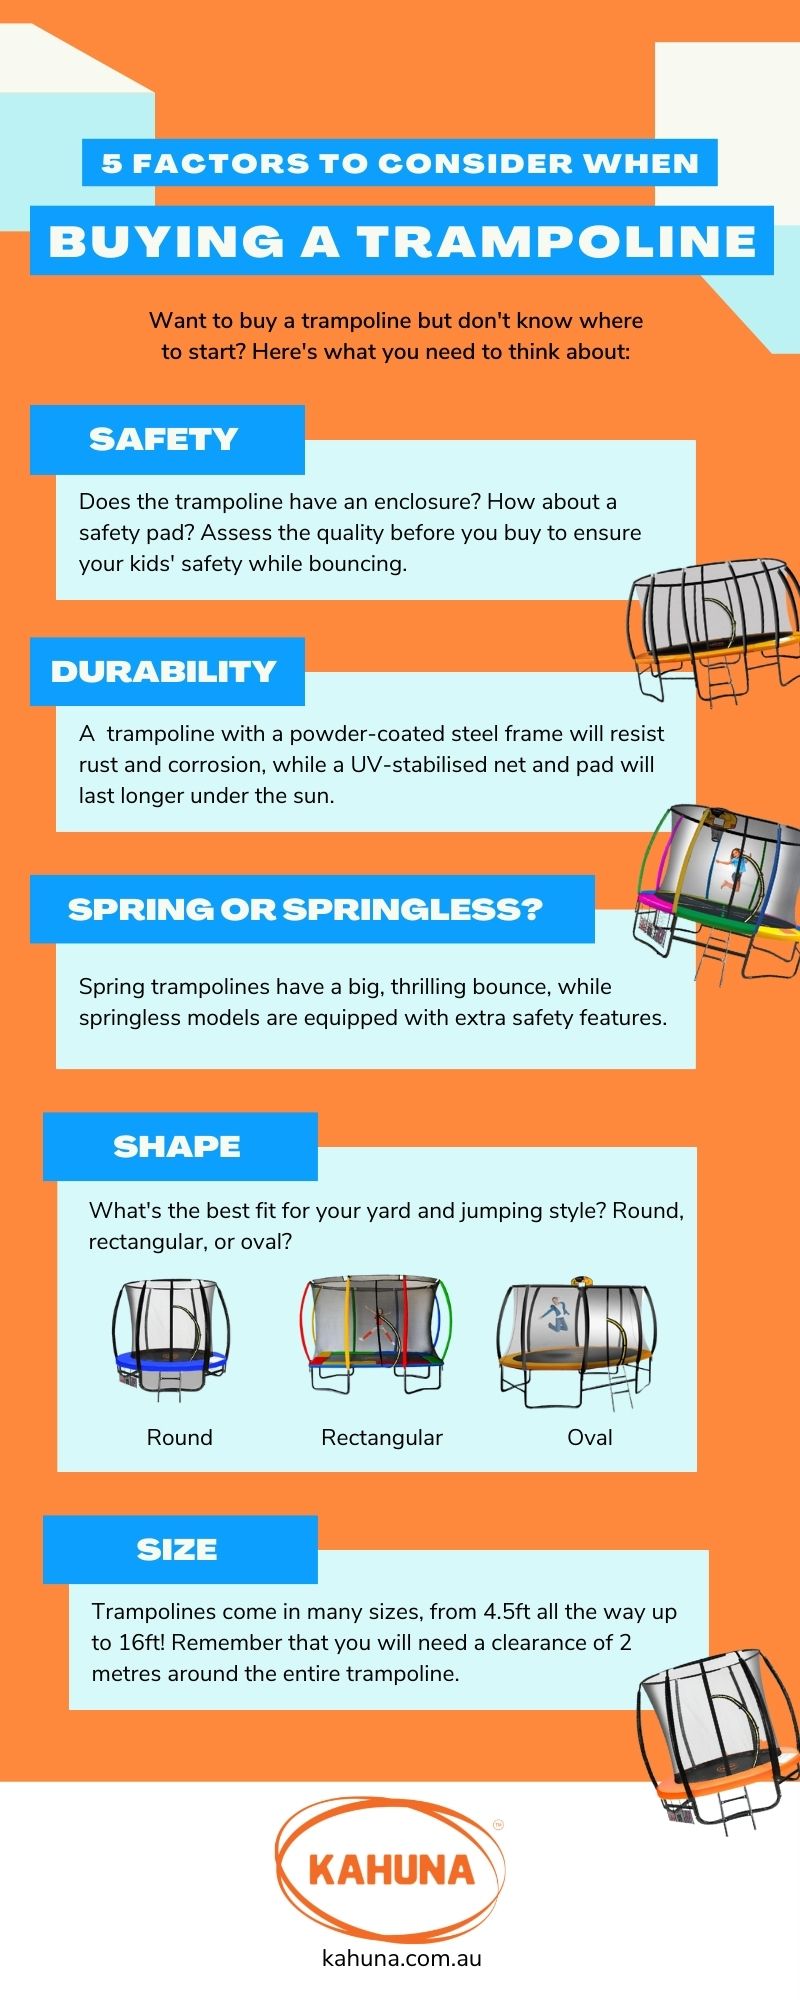 The 5 things you need to consider when buying a trampoline are safety, durability, type, shape and size.